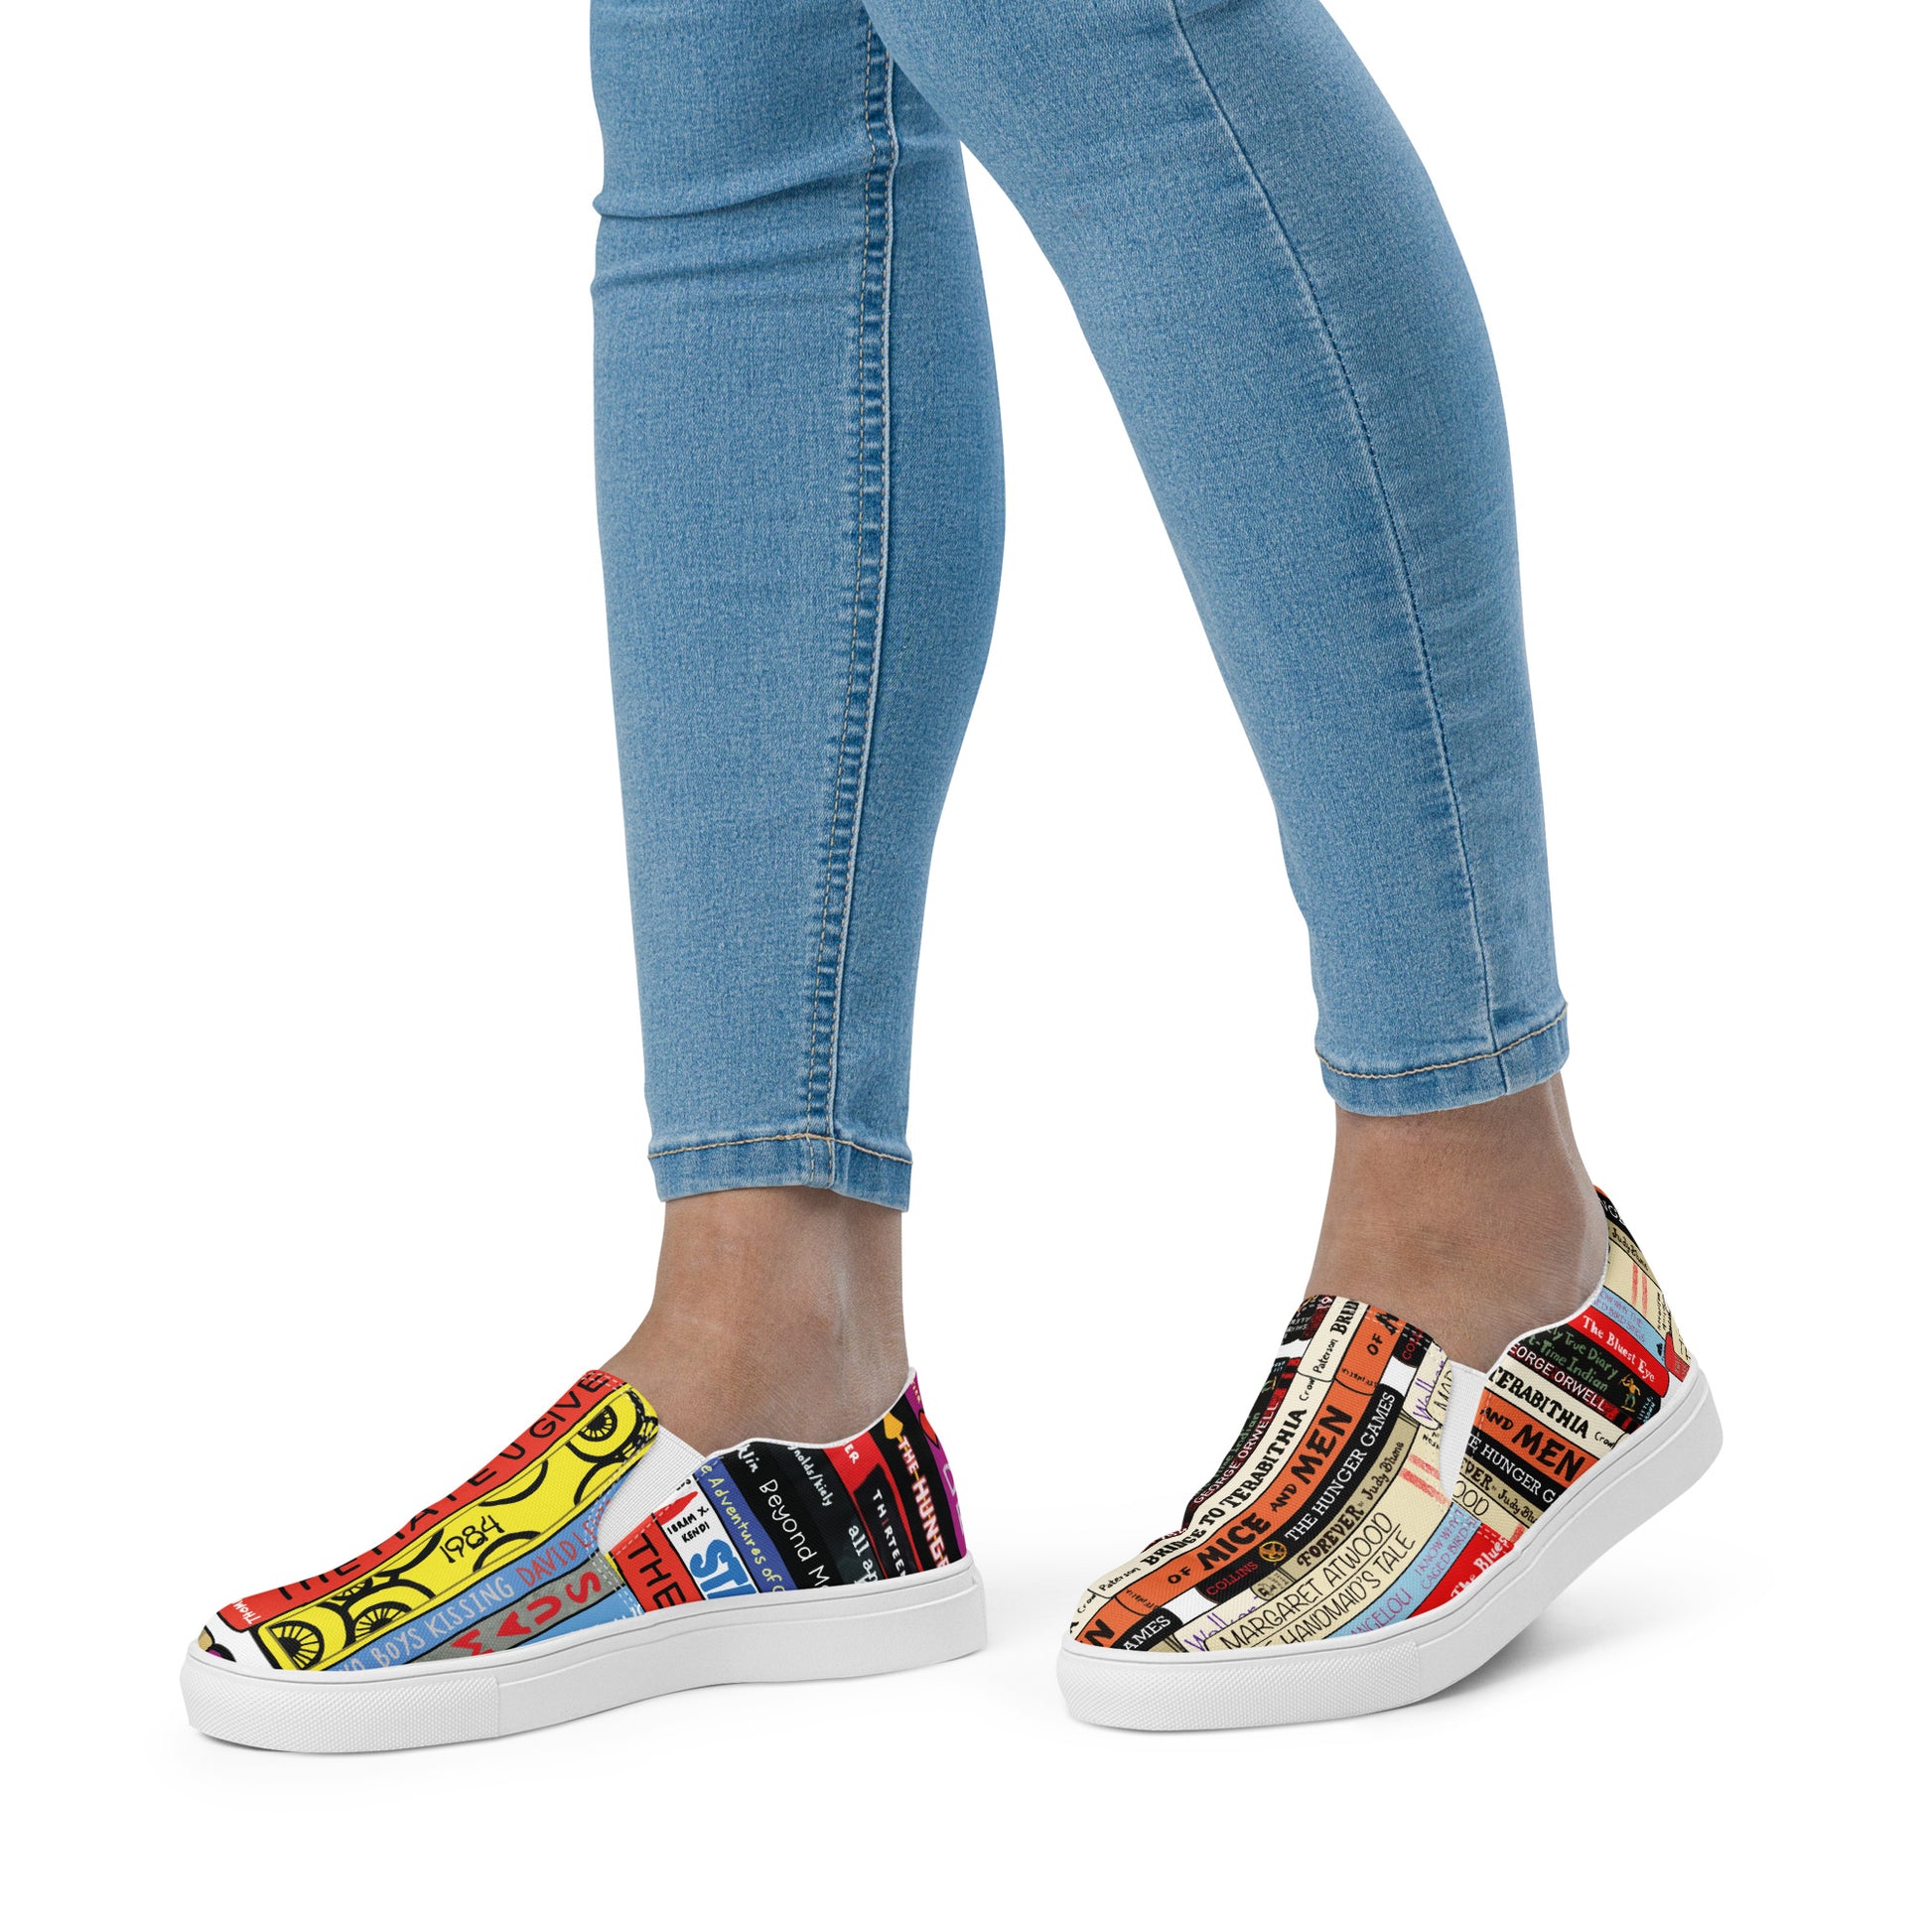 Banned Books Women's Slip-On Canvas Shoes